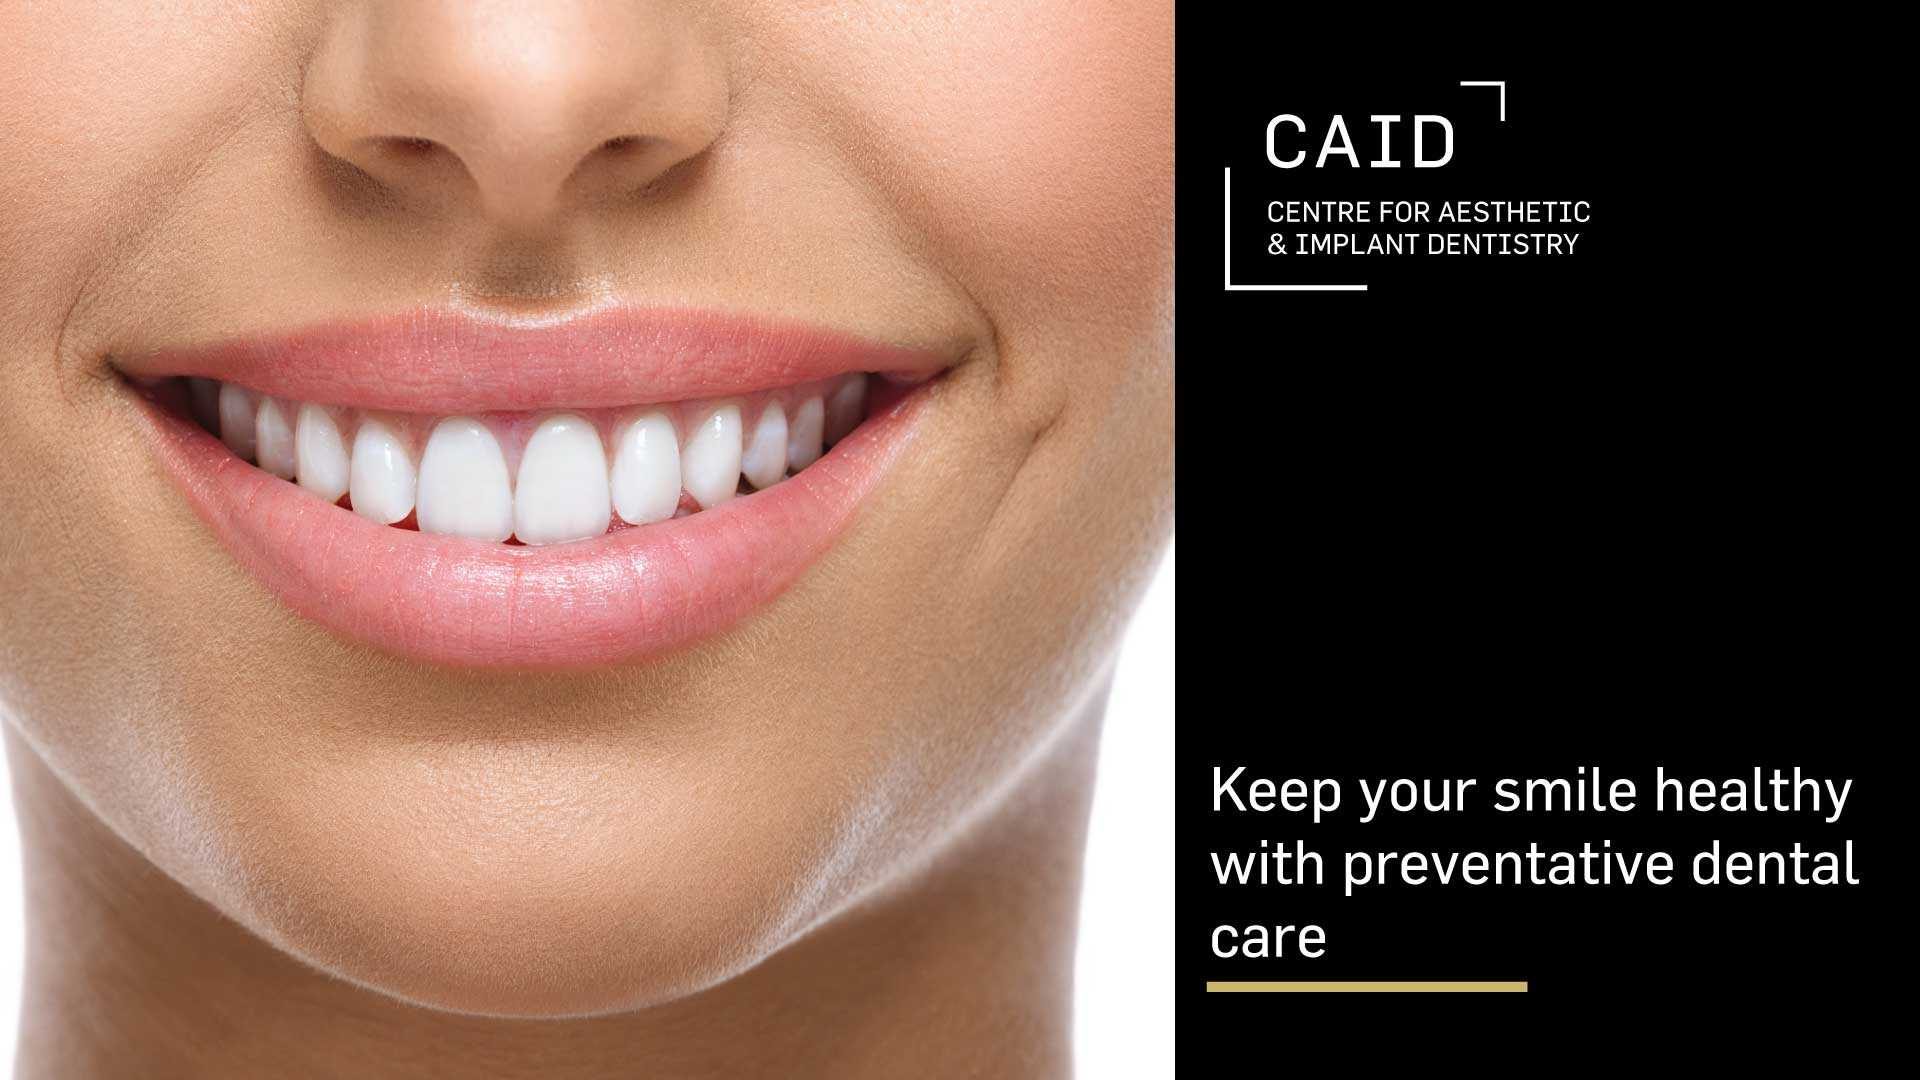 Keeping Your Smile Healthy With Preventative Dental Care